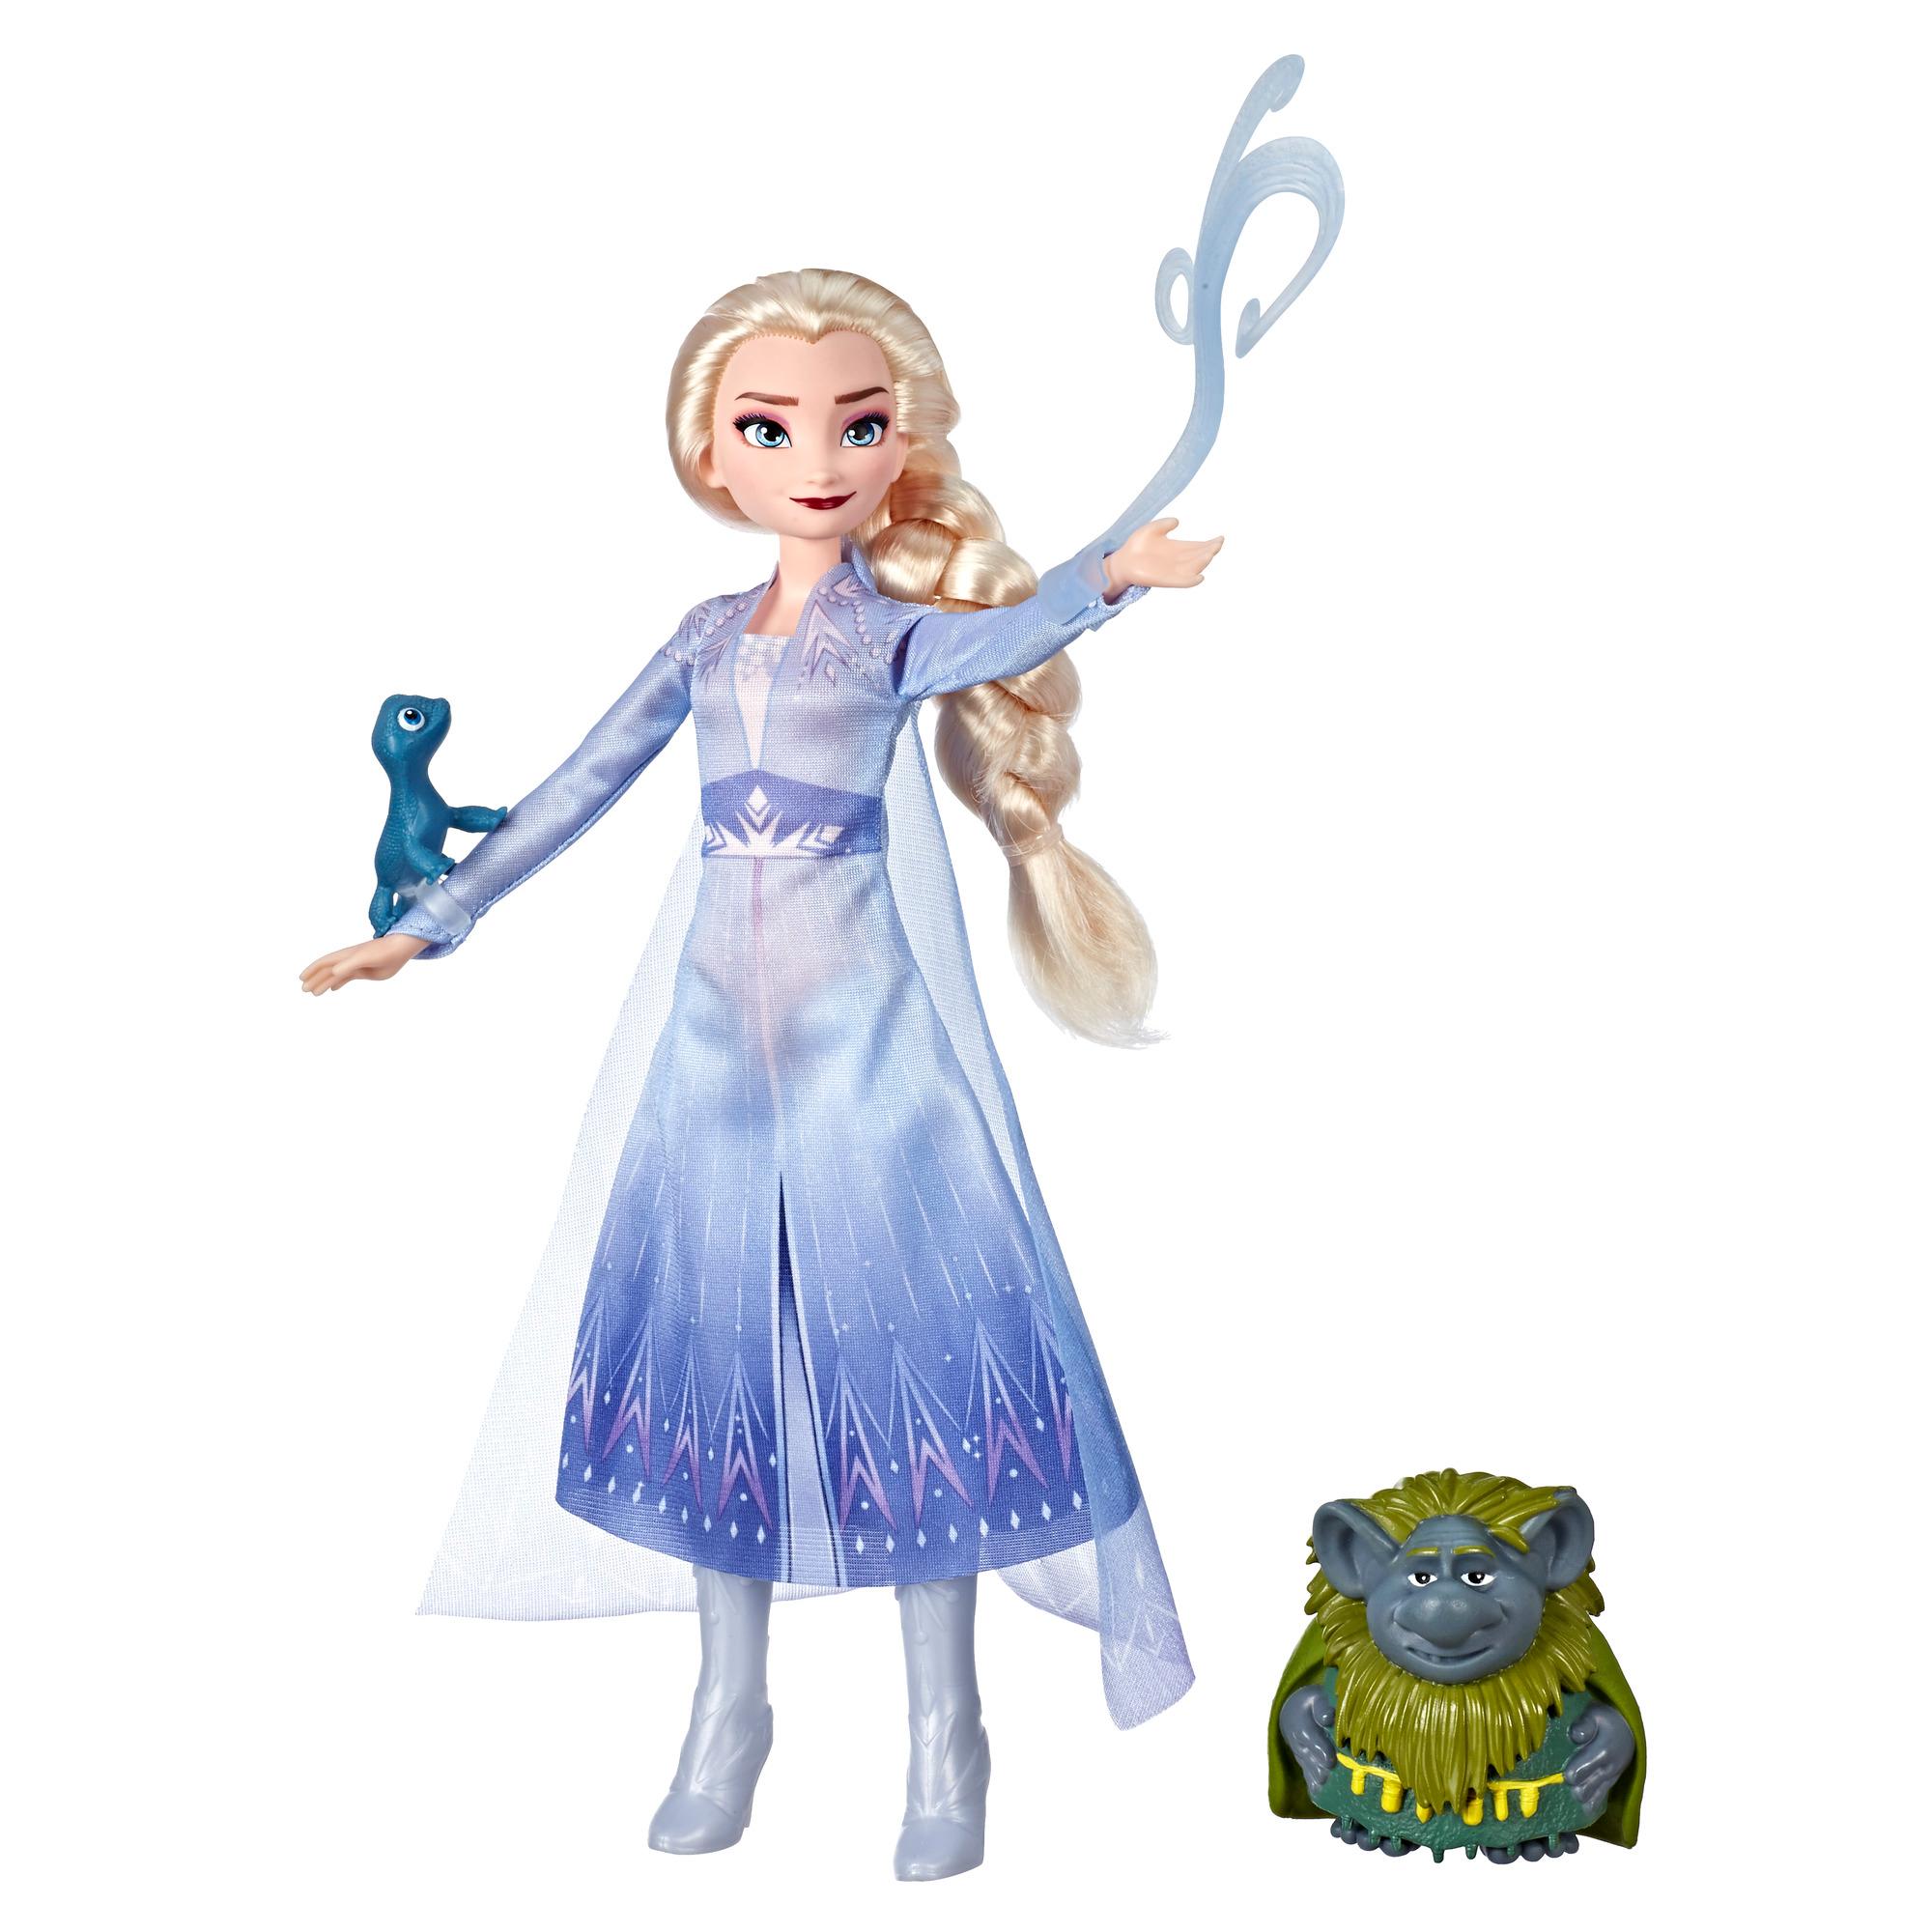 Disney Frozen Elsa Fashion Doll In Travel Outfit Inspired by Frozen 2